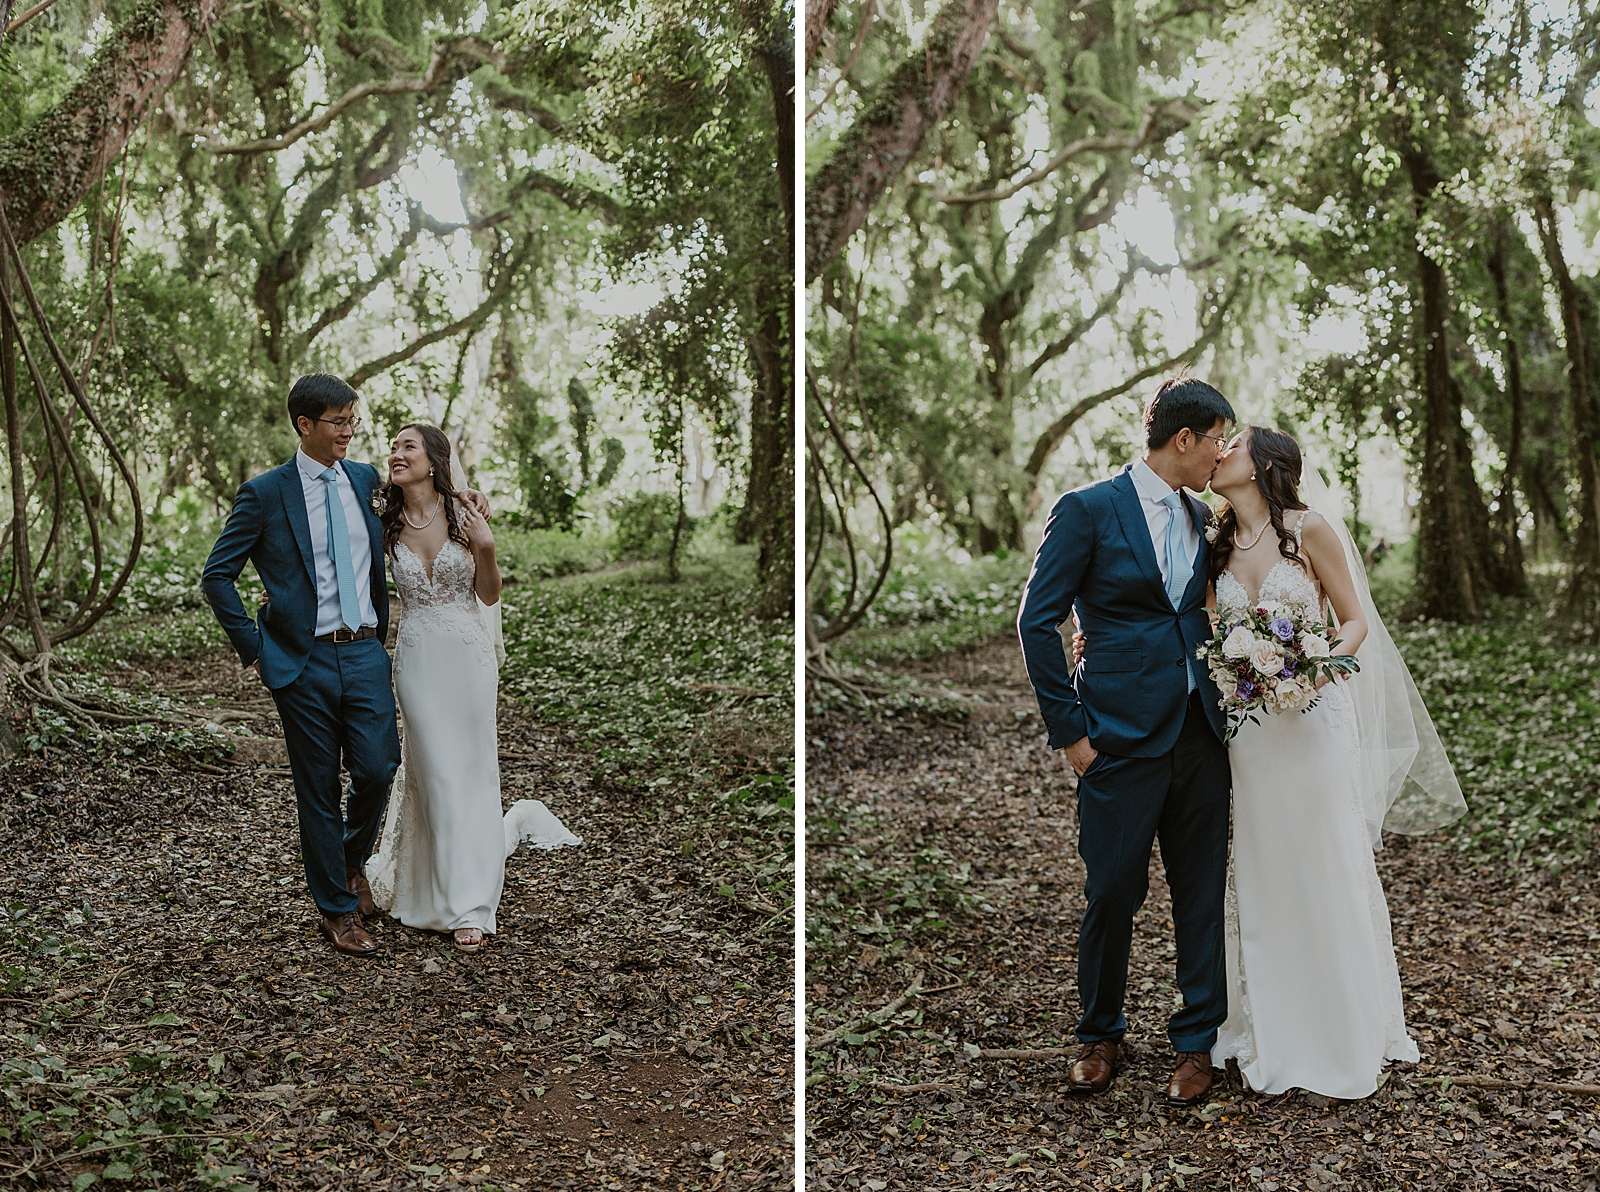 Bride and Groom walking in the forest together with arms around each other